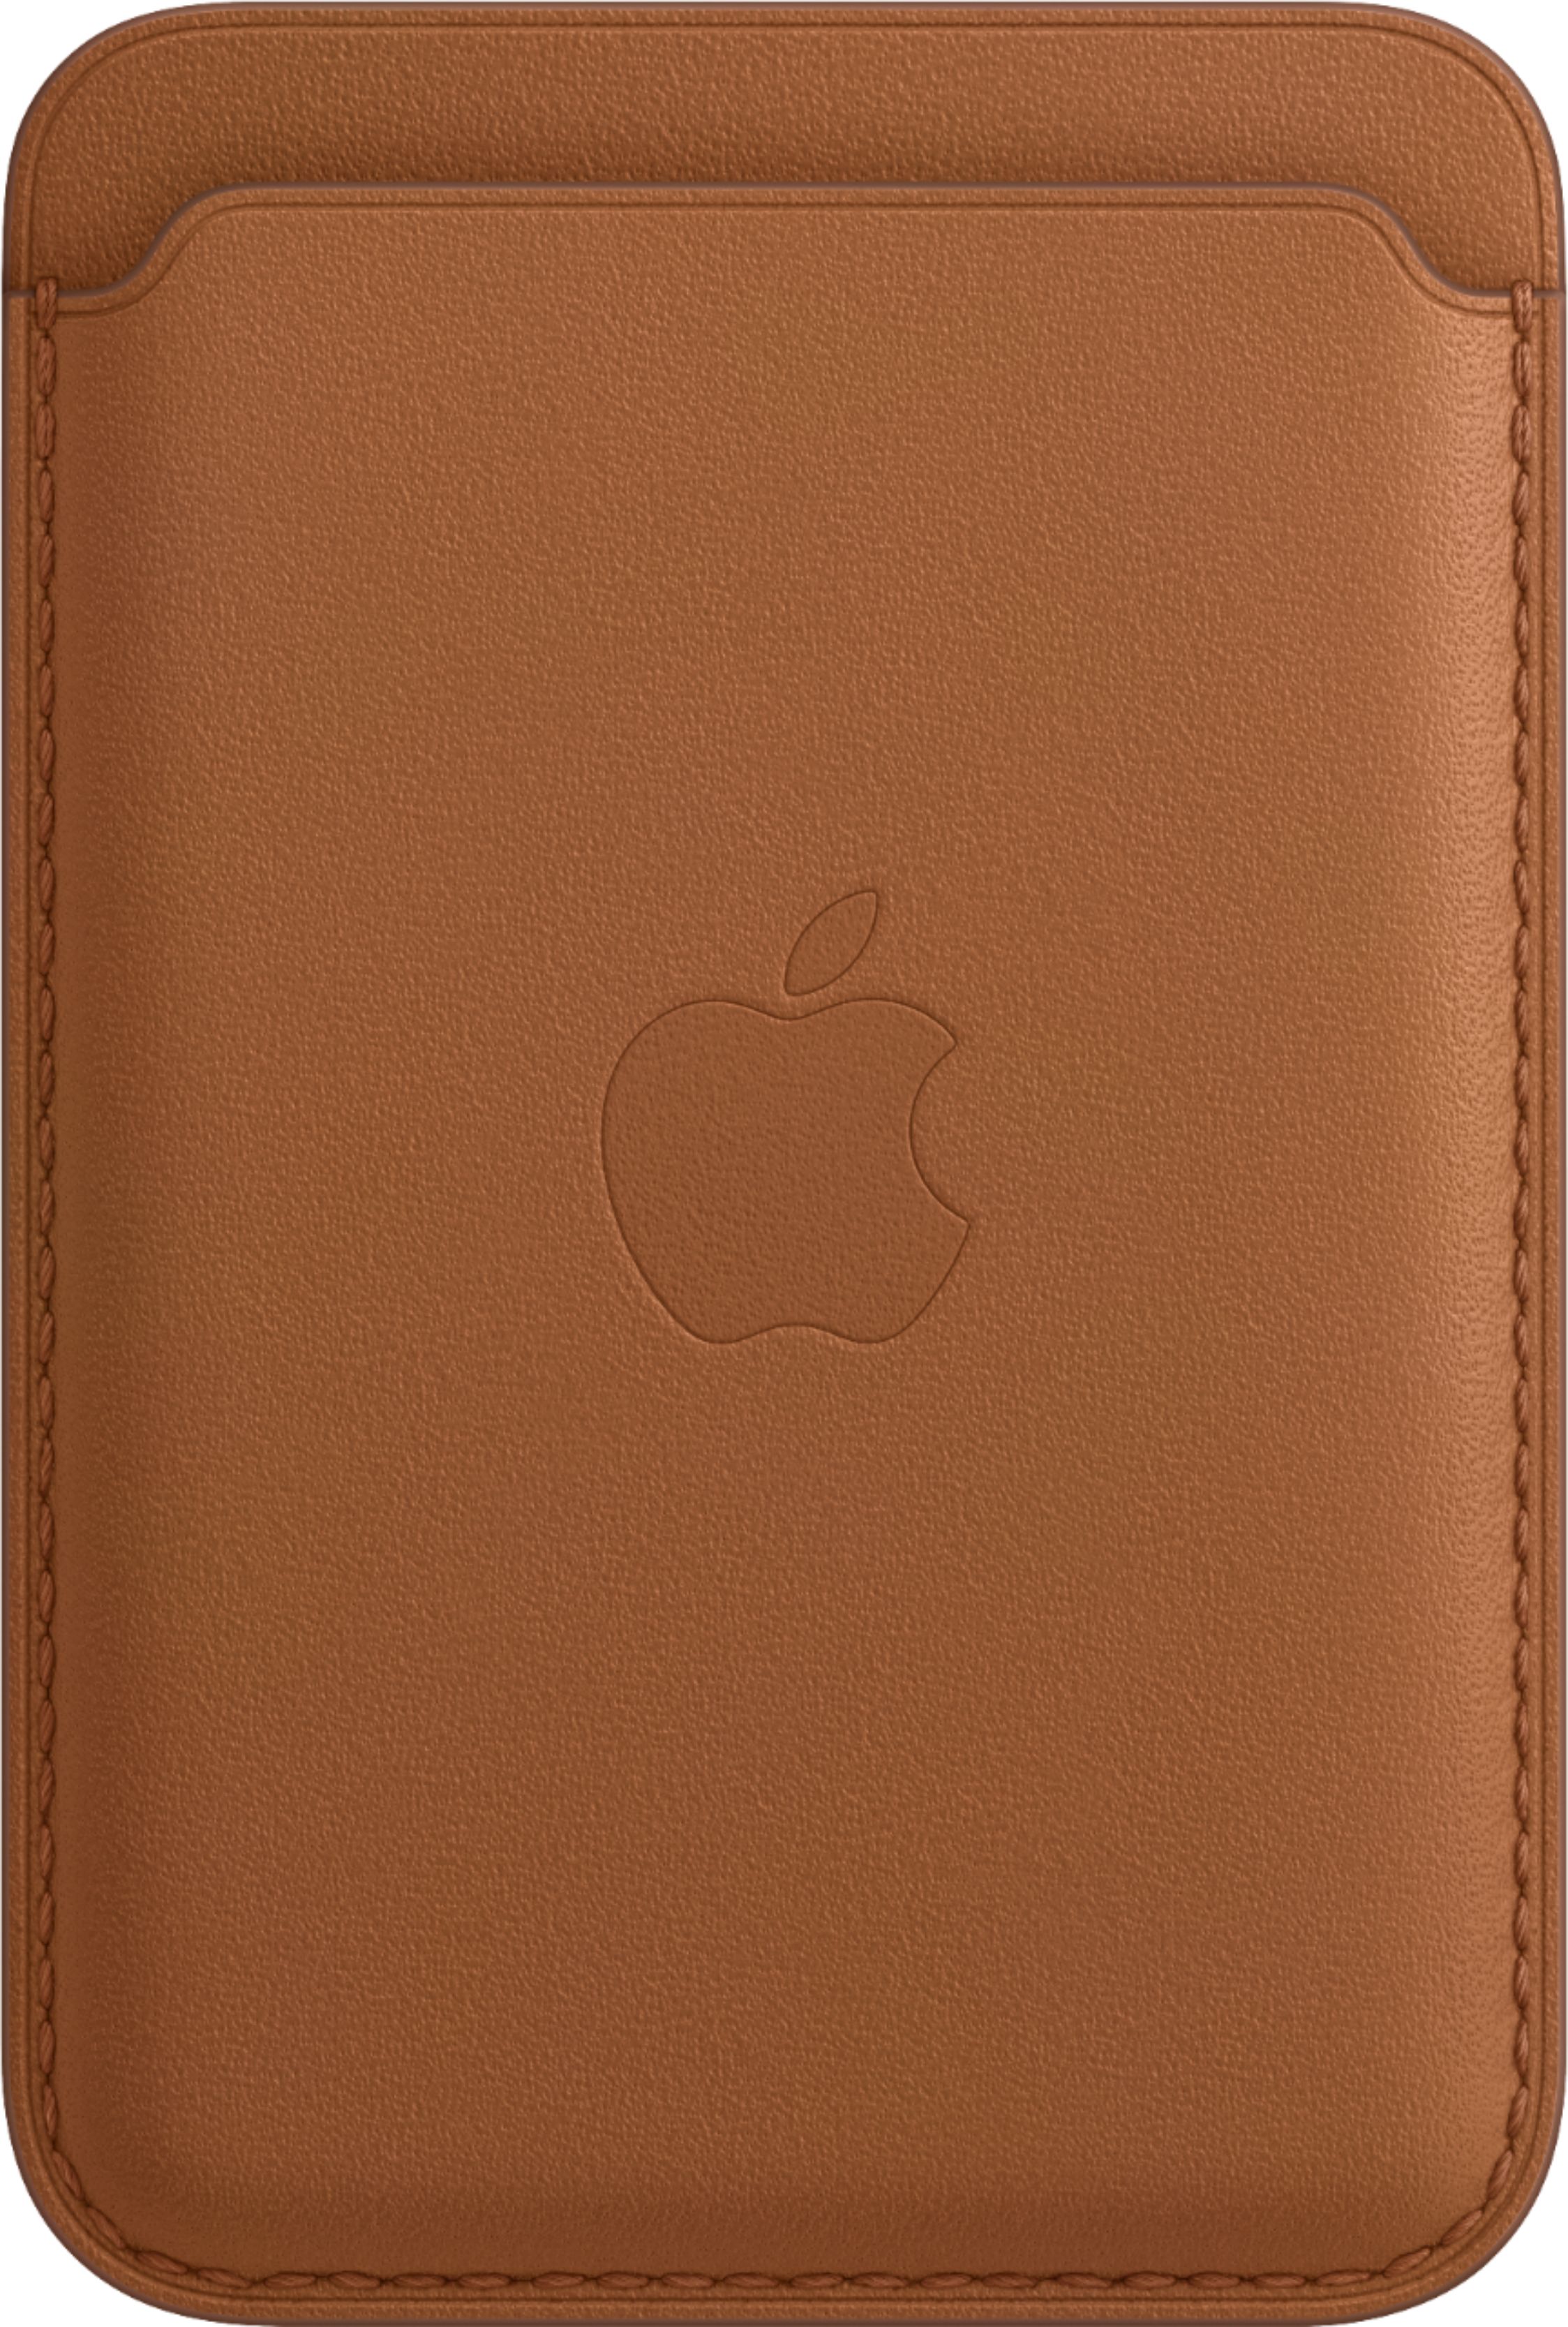 NEW COLOURS Official Genuine Apple Leather Magsafe Wallet With